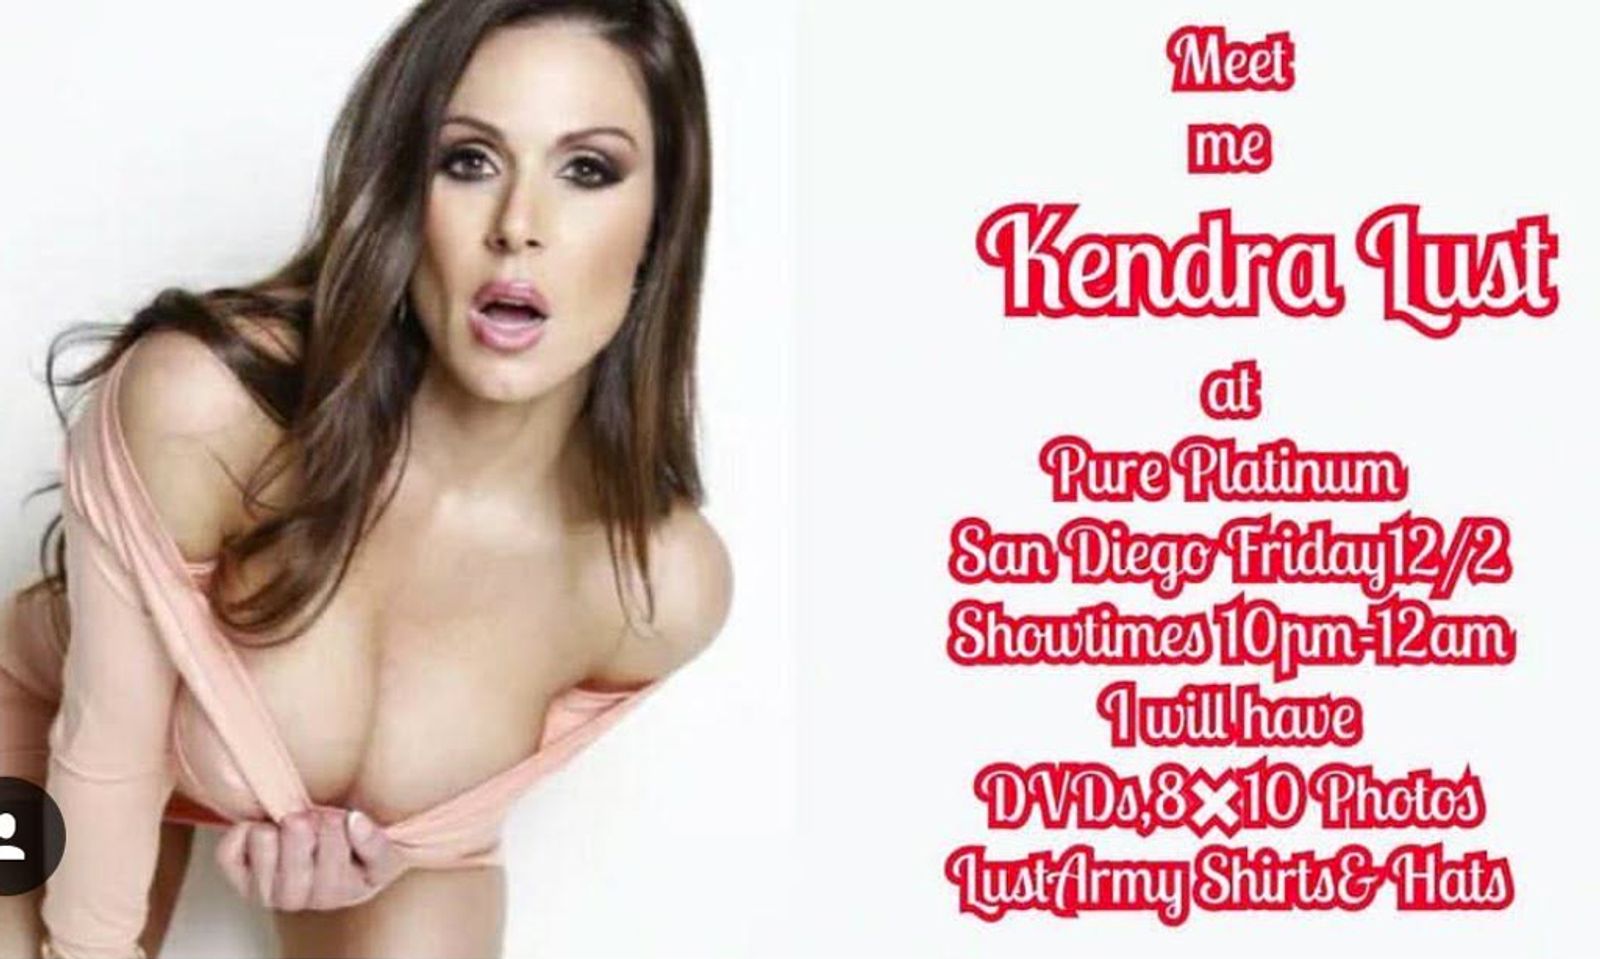 Kendra Lust Feature Dances in San Diego, Starts Holiday Contest